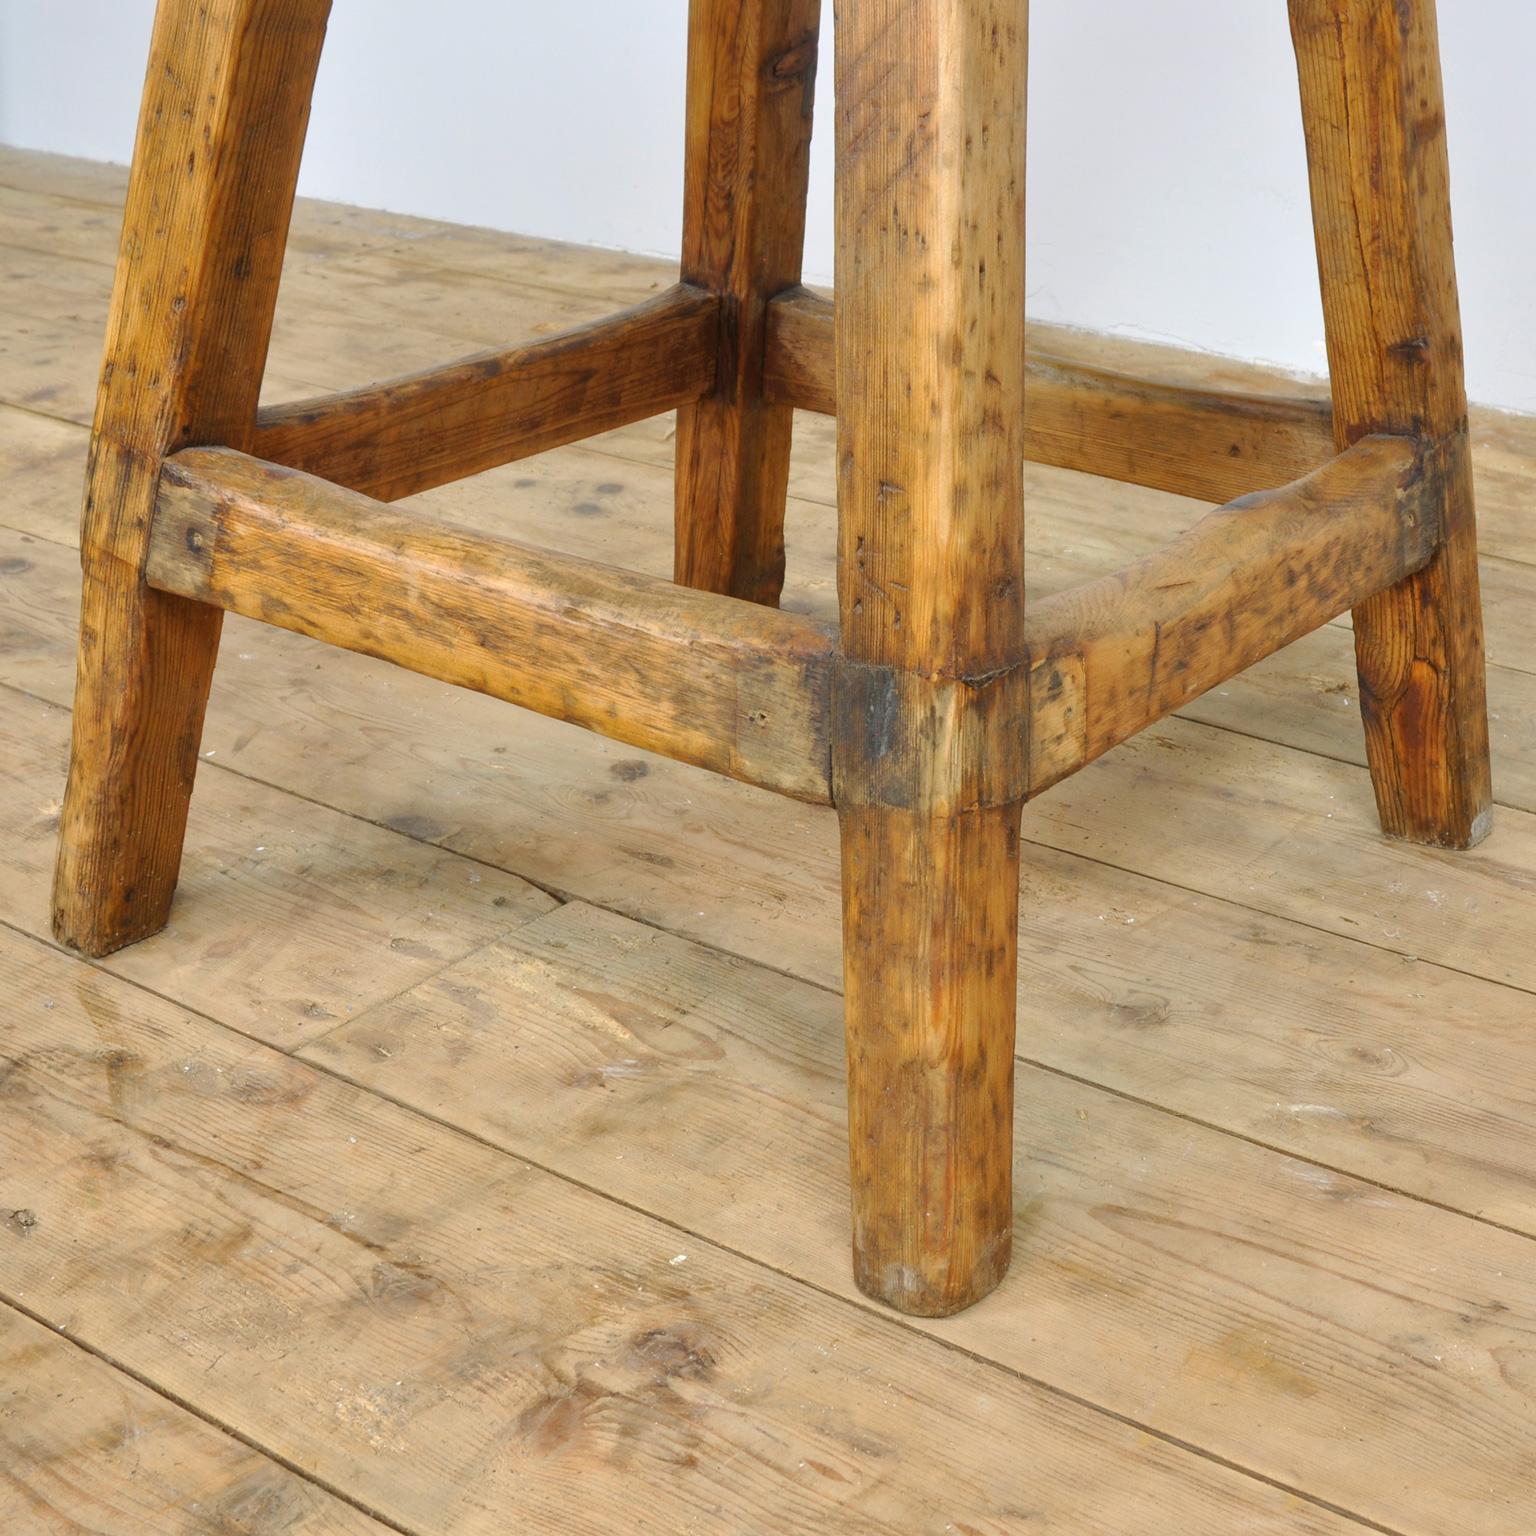 Simple wooden stool with a great look!